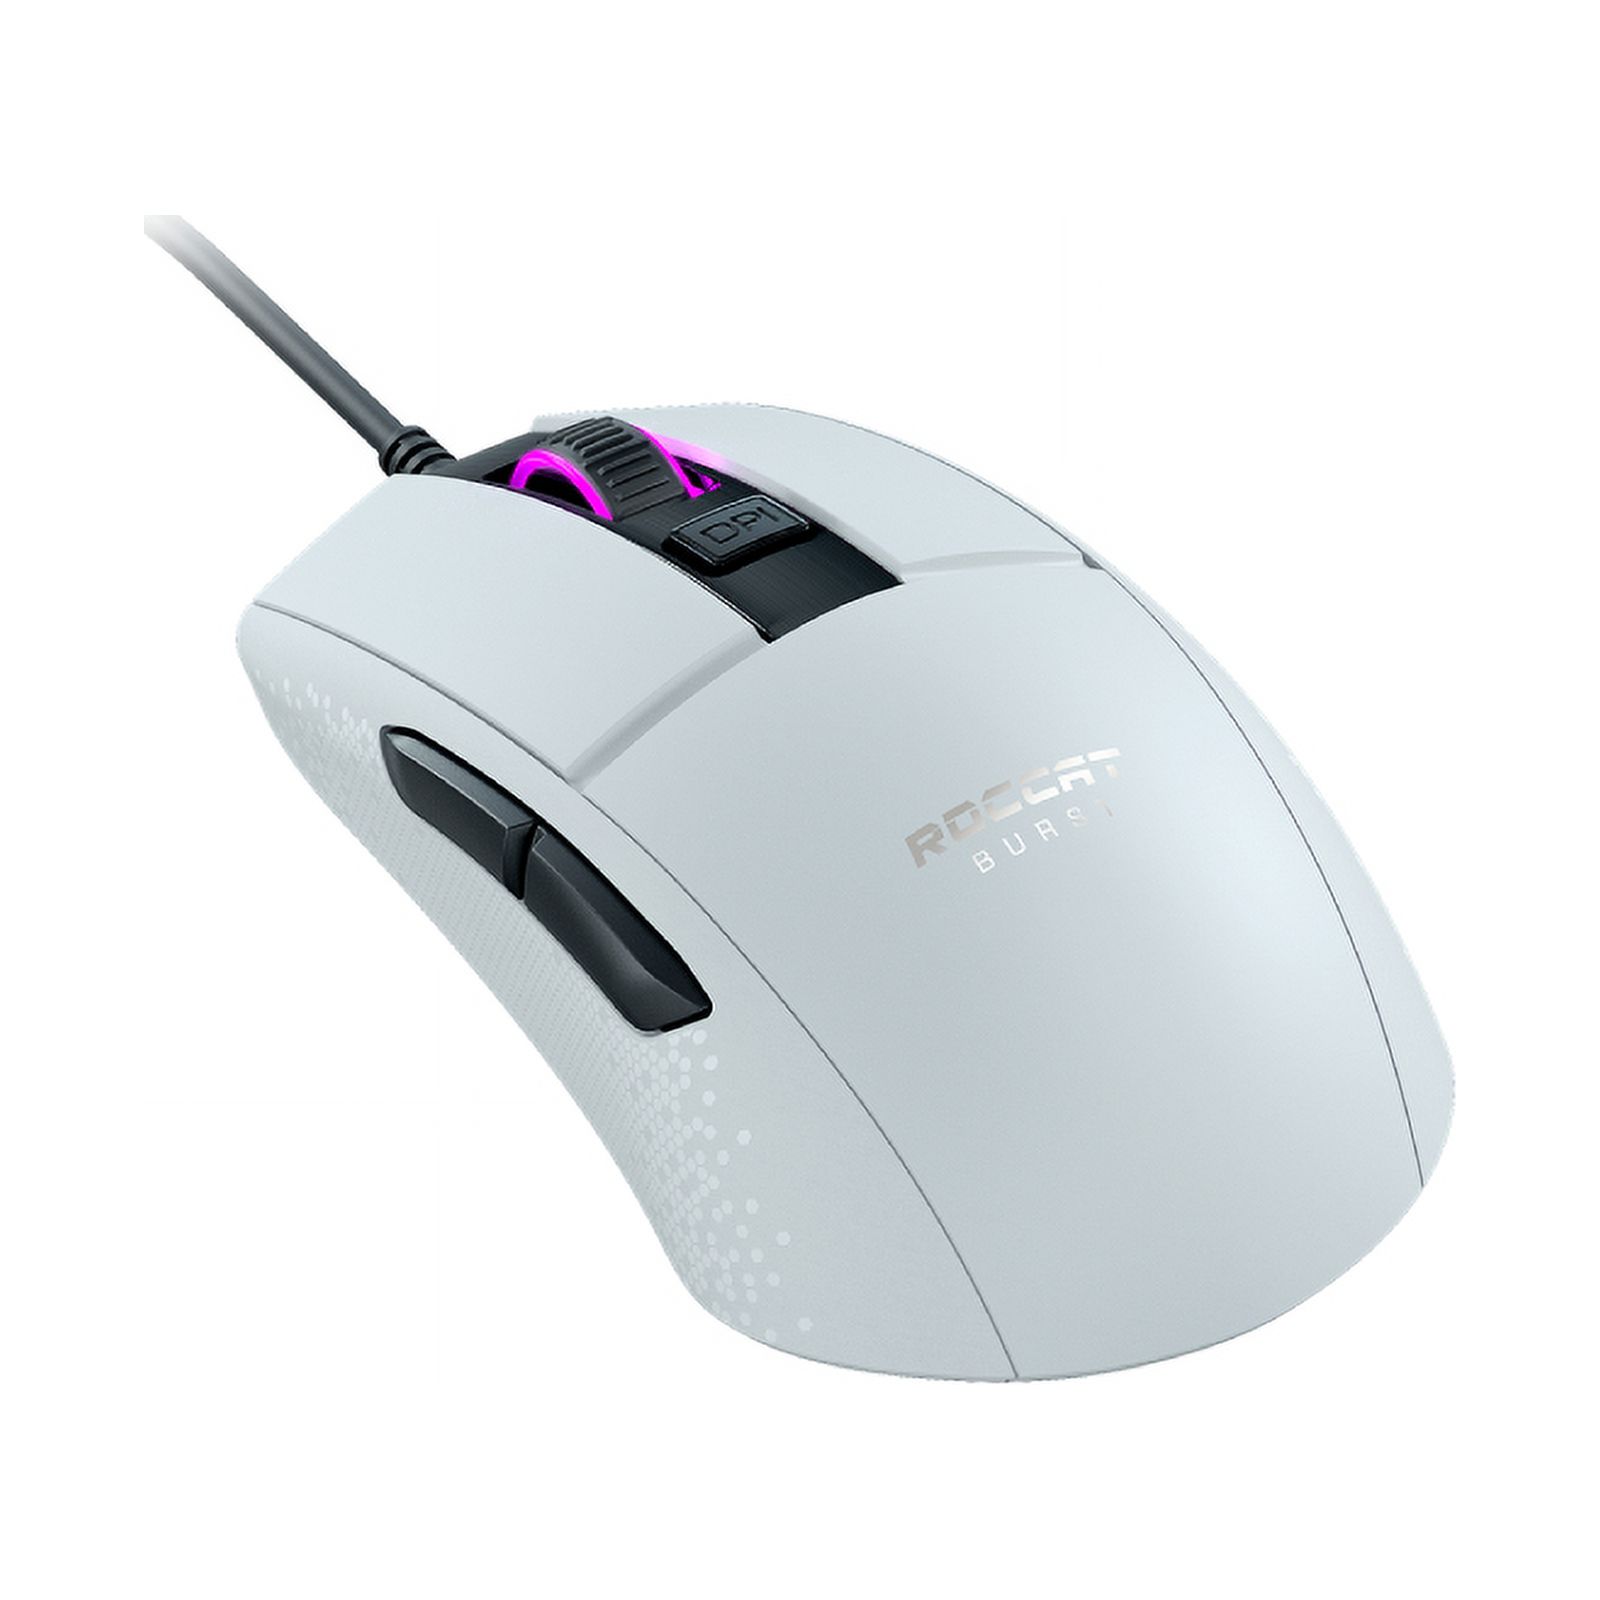 ROCCAT BURST Core - Mouse - optical - wired - USB 2.0 - white - image 2 of 3